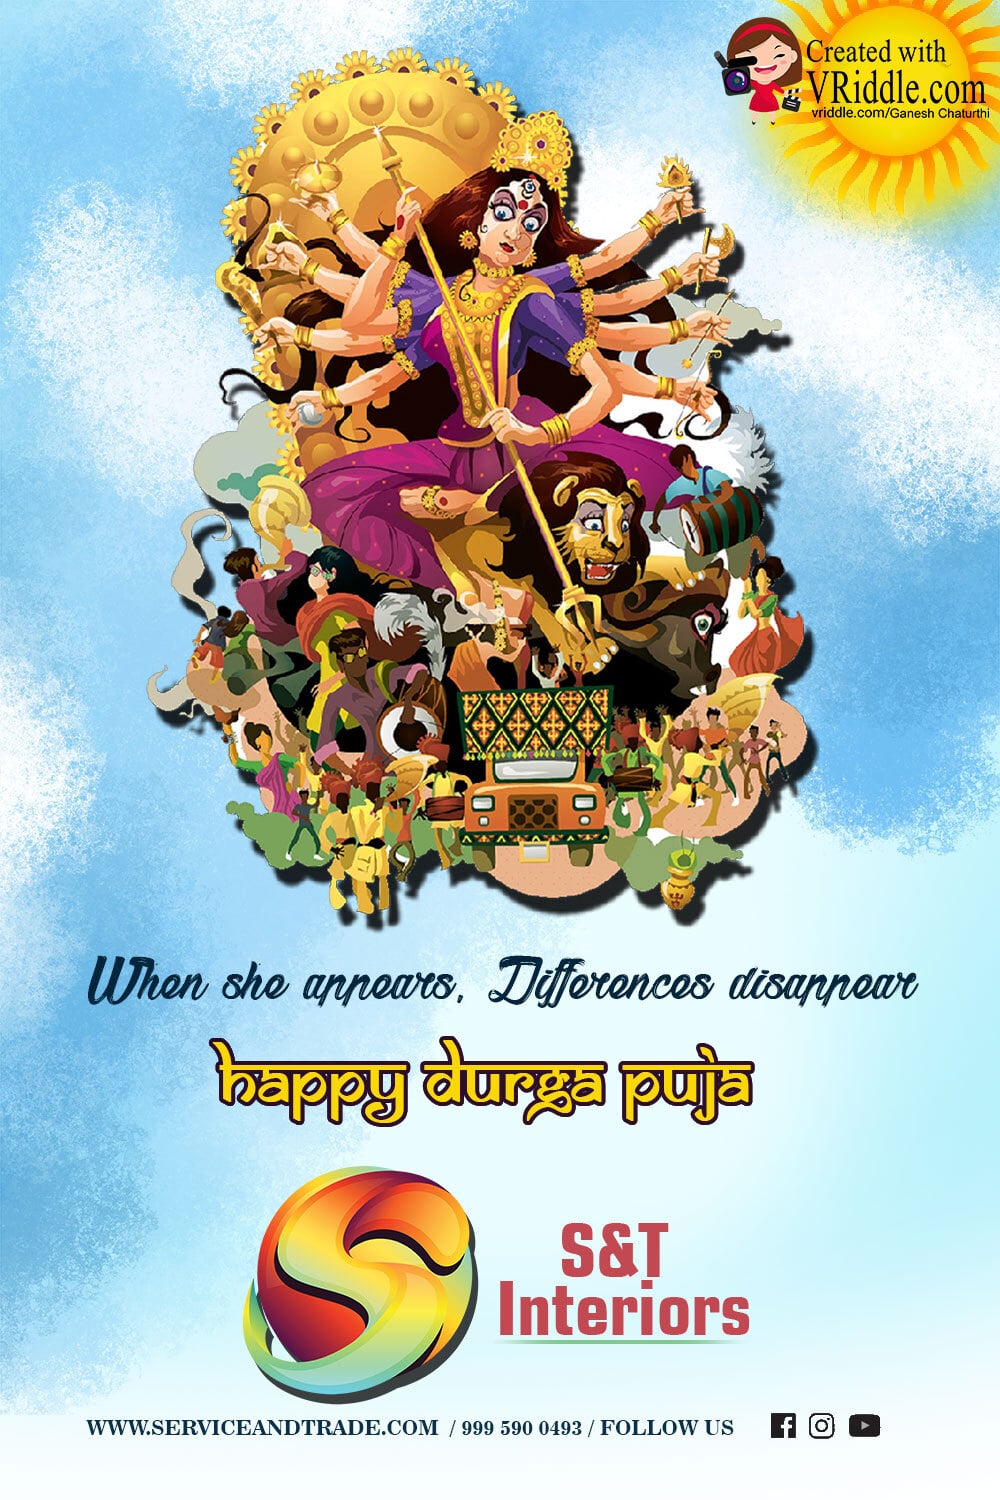 Blue Sky Theme Dussehra Greetings Throne Of Durga – VRiddle